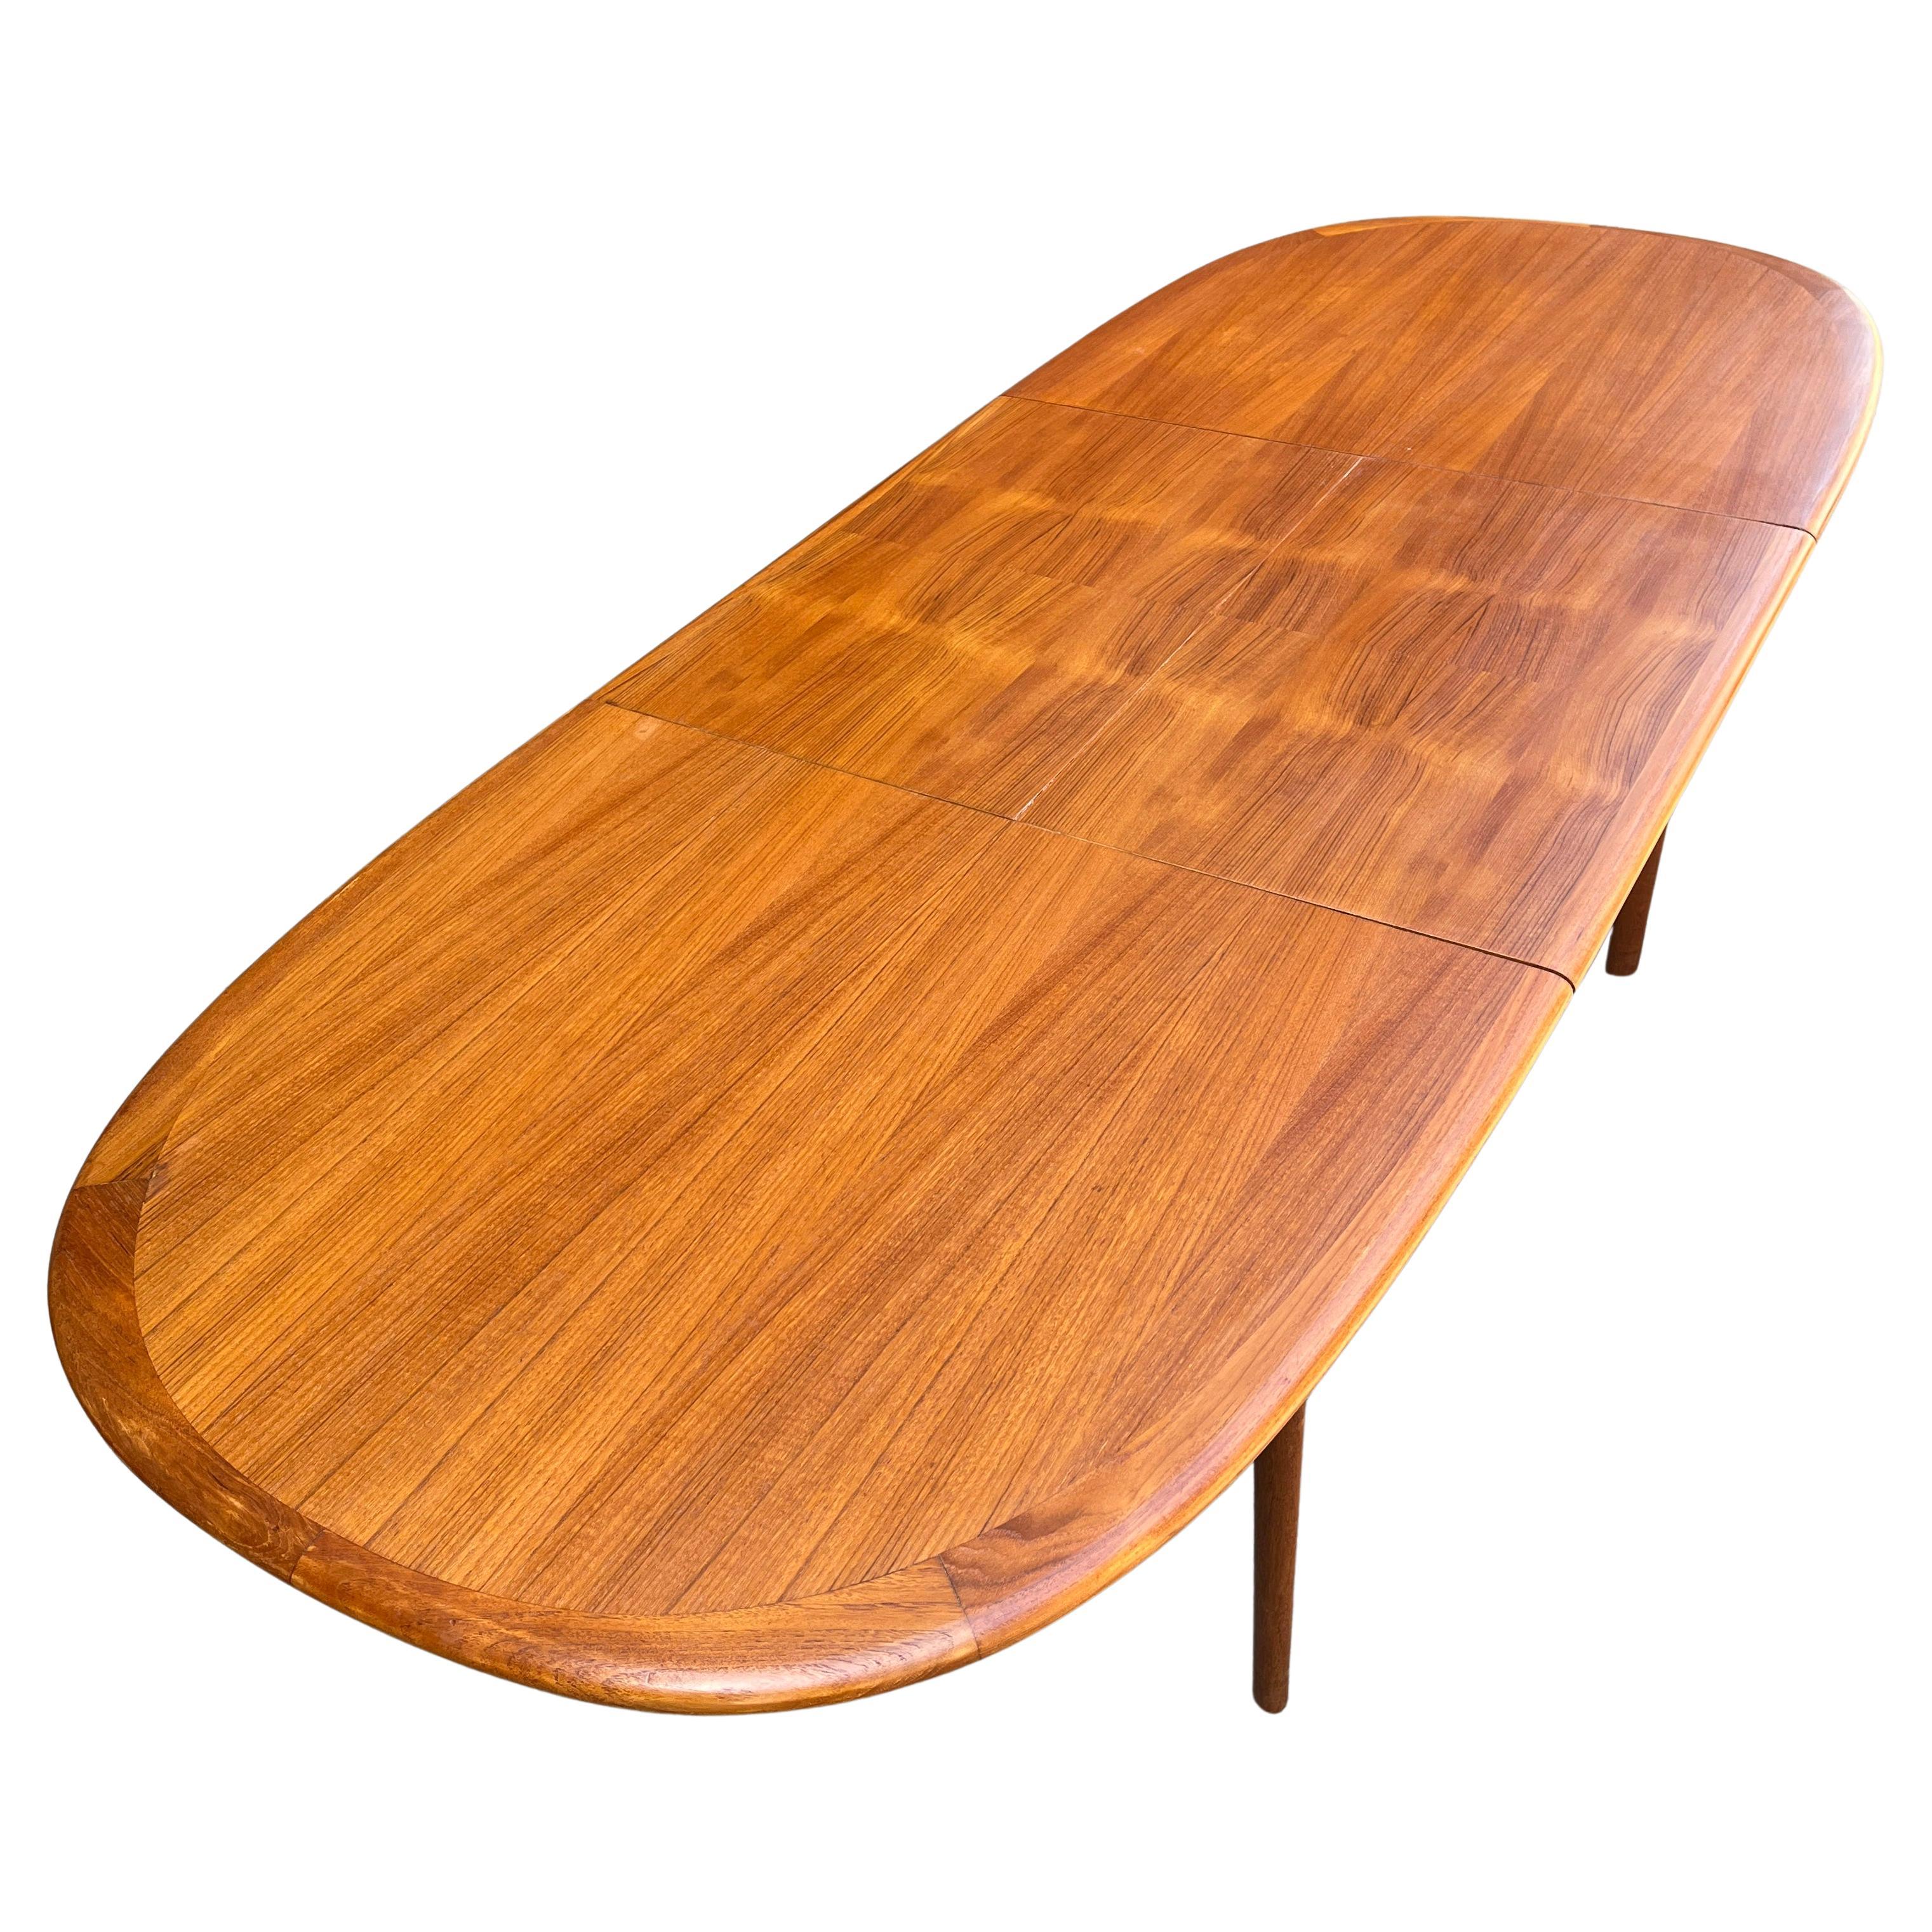 For your consideration is this gorgeous teak dining table designed by Svend Madsen. Featuring hidden butterfly leaf with no fading. Closed the table is 63''. The table fully extended is 91'' long. The kneehole is 24.25''. This beautiful and seldom